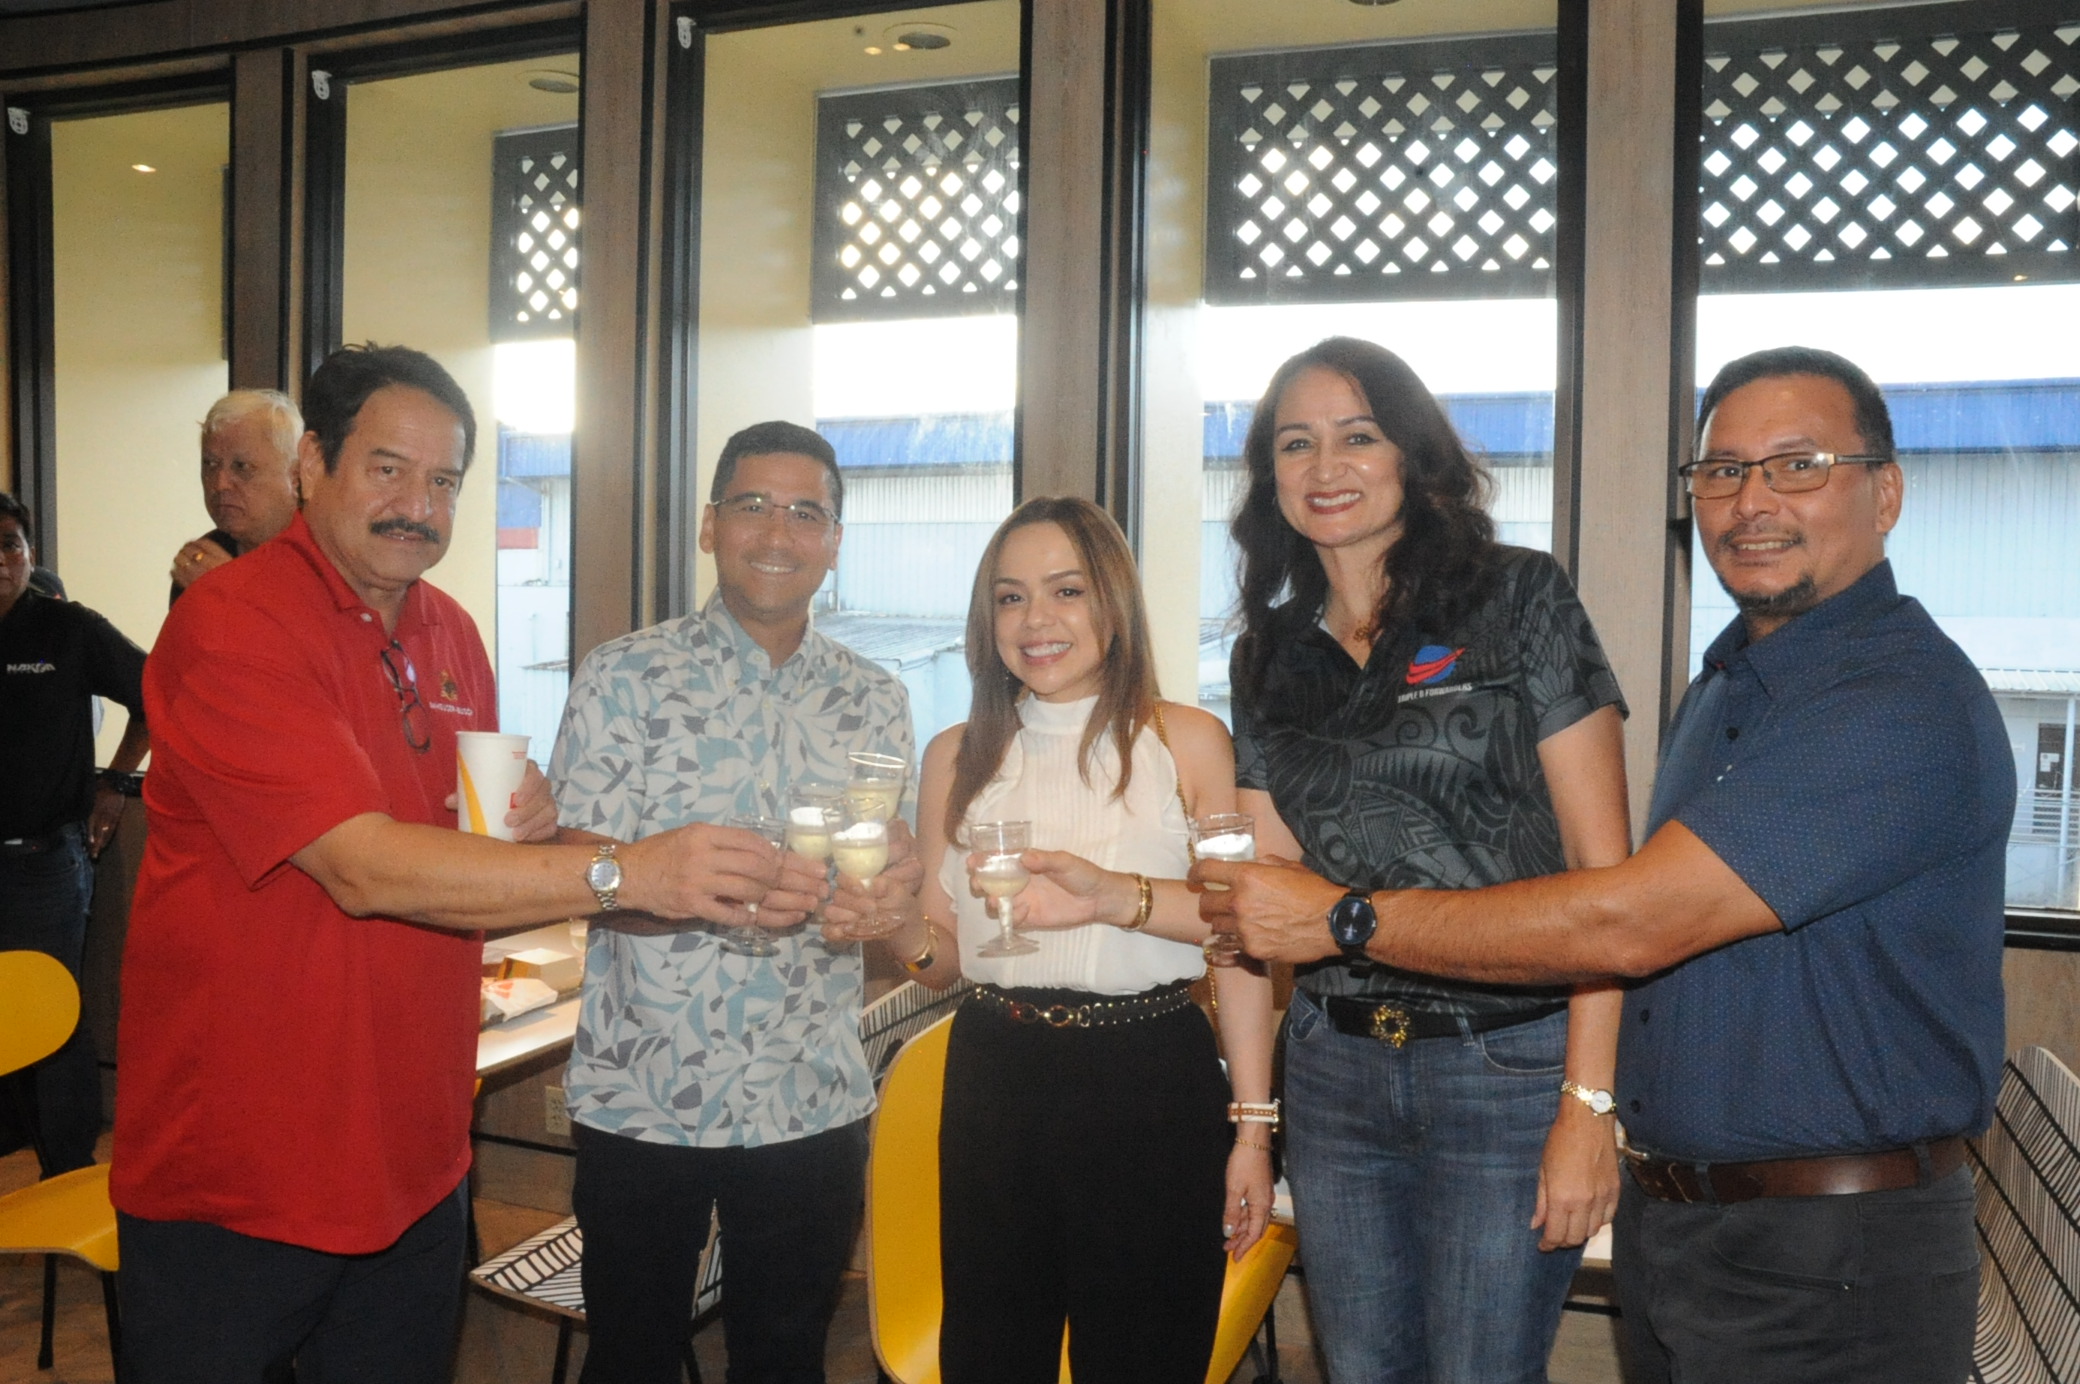 (From left) Frank S.N. Shimizu Jr., export manager for Ambros Inc.; Patrick Bulaon, vice president and general manager, Guam &amp; Micronesia for Matson Navigation Co.; Jennifer Bulaon, wife of Patrick; Yvonne Speight, general manager, Triple B Forwarders Inc.; and Joseph Quintanilla, card services officer, Bank of Guam.